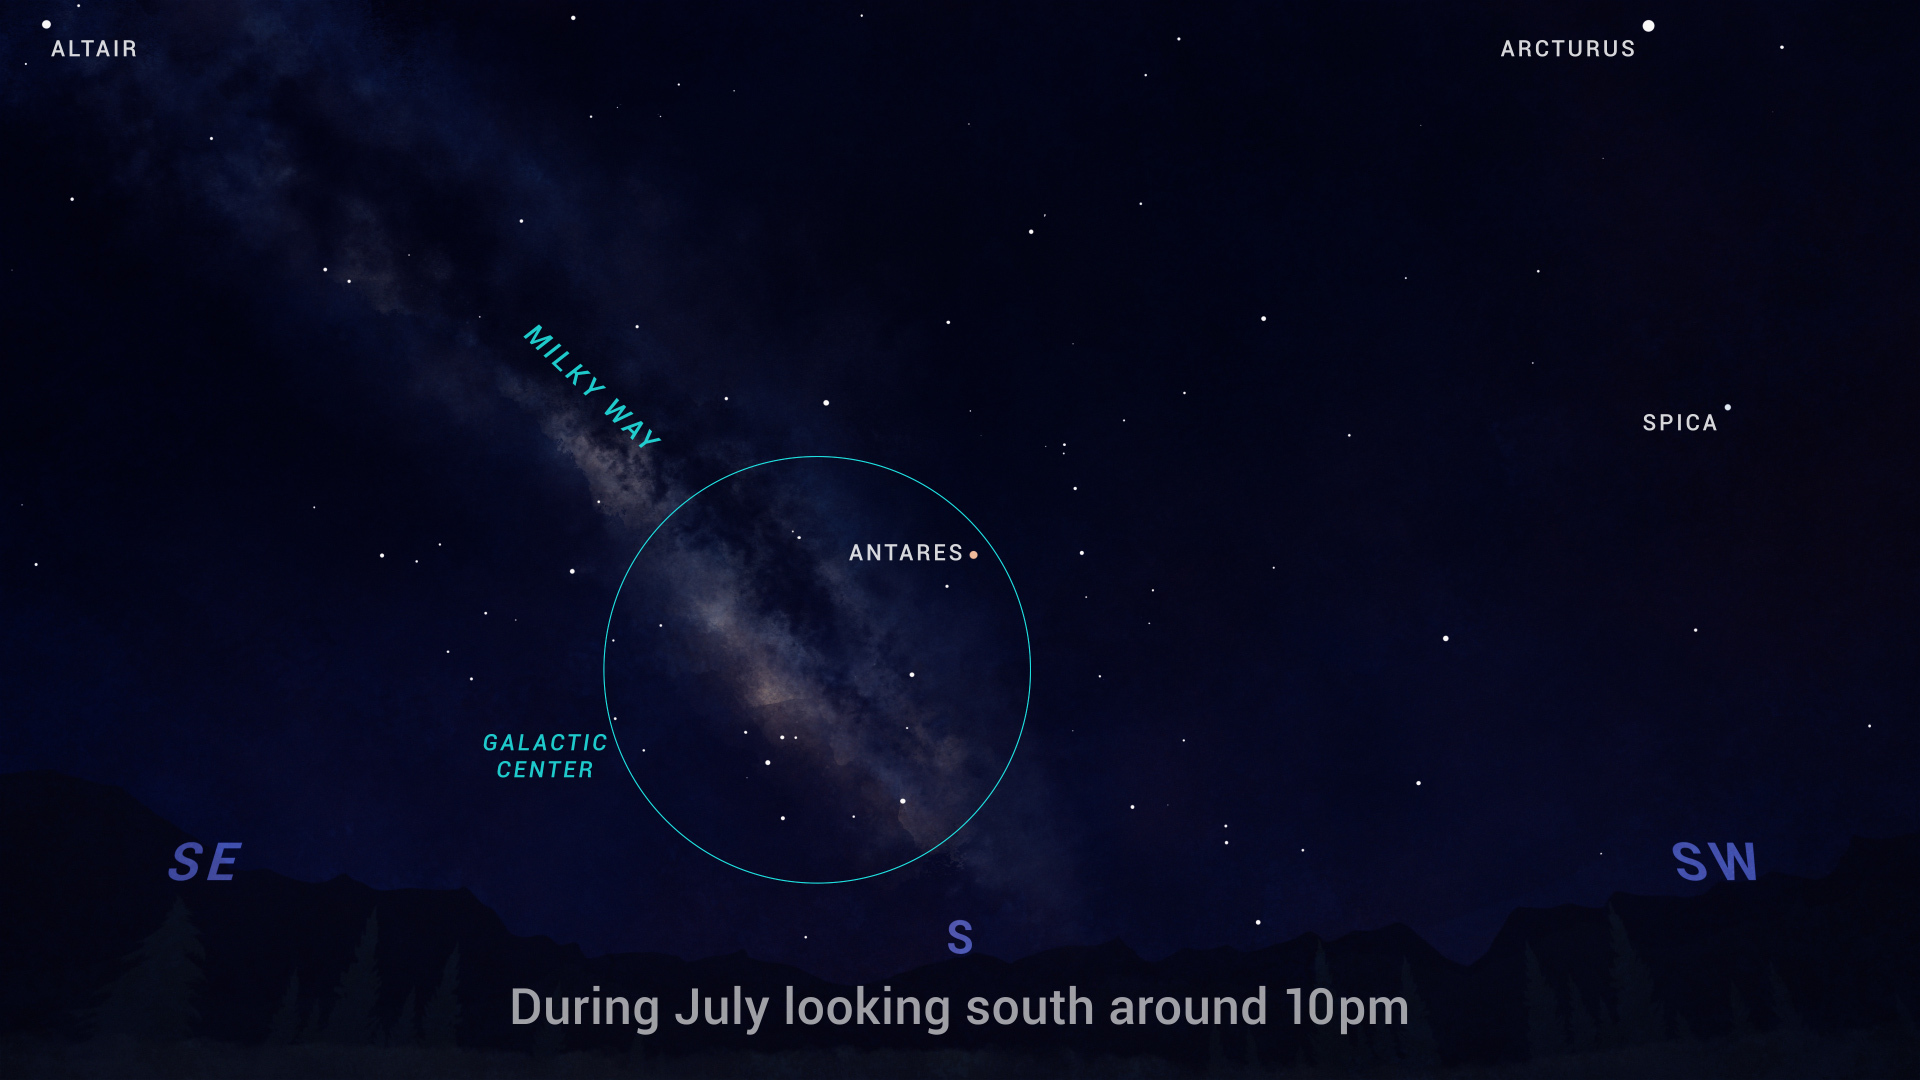 An illustrated sky chart shows the evening sky facing south, around 10pm in July. A faint, cloudlike band of light appears to extend upward toward the left from the horizon at center. This is labeled as the Milky Way. A large circle above the lower third of the Milky Way's band is labeled "galactic center."